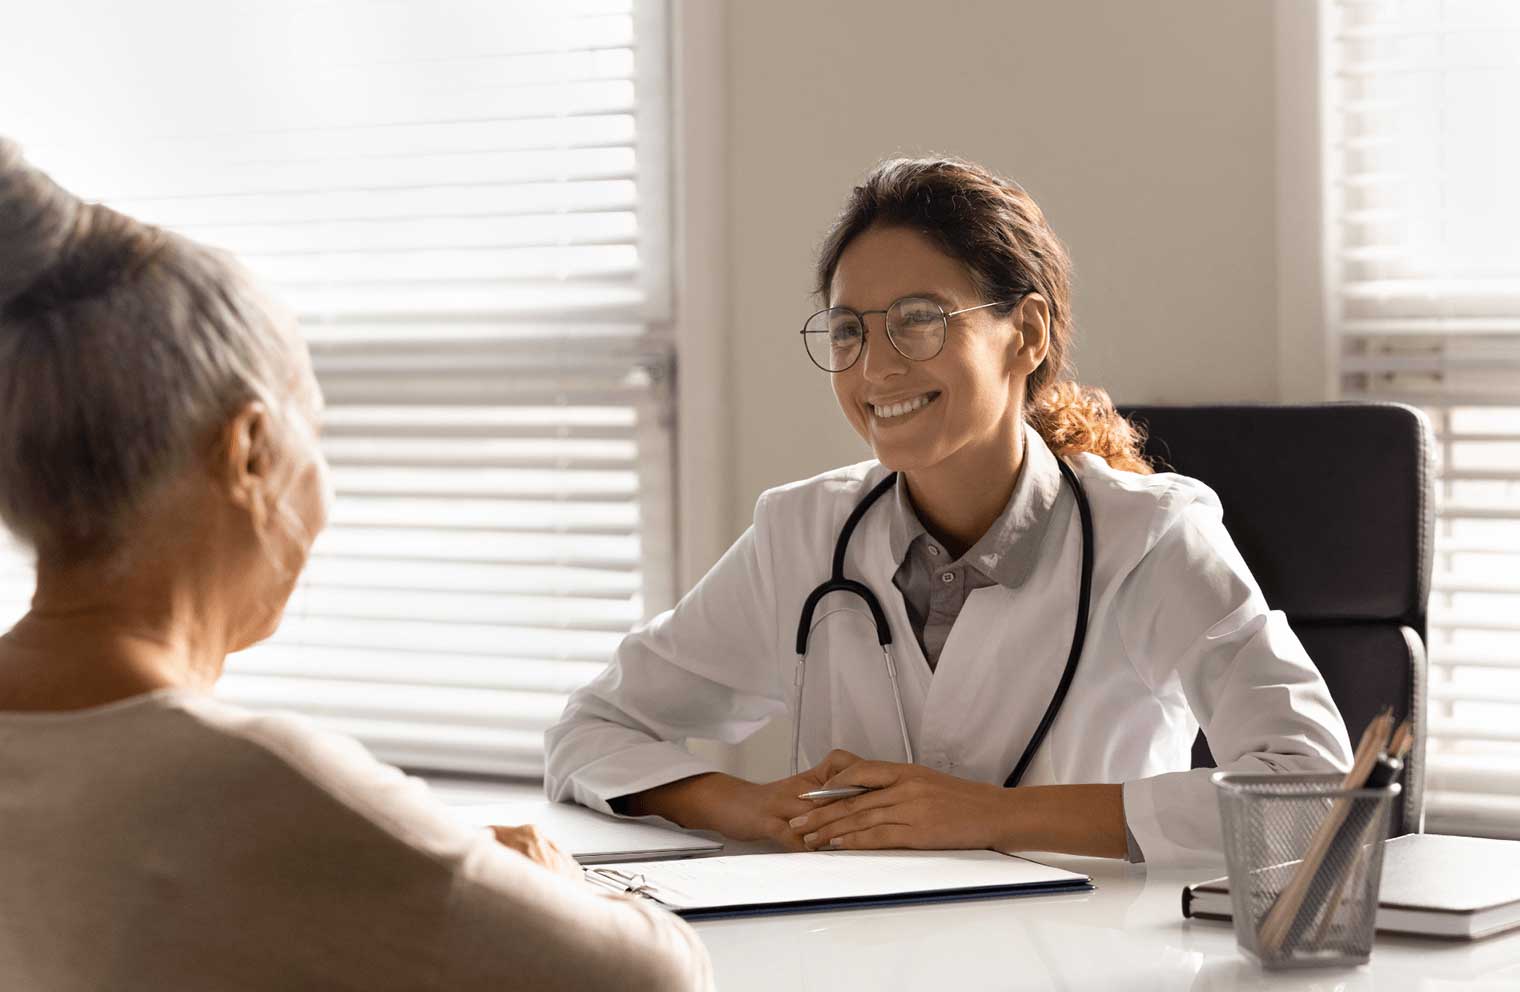 A health care professional smiles at her patient as they sit at a desk together.